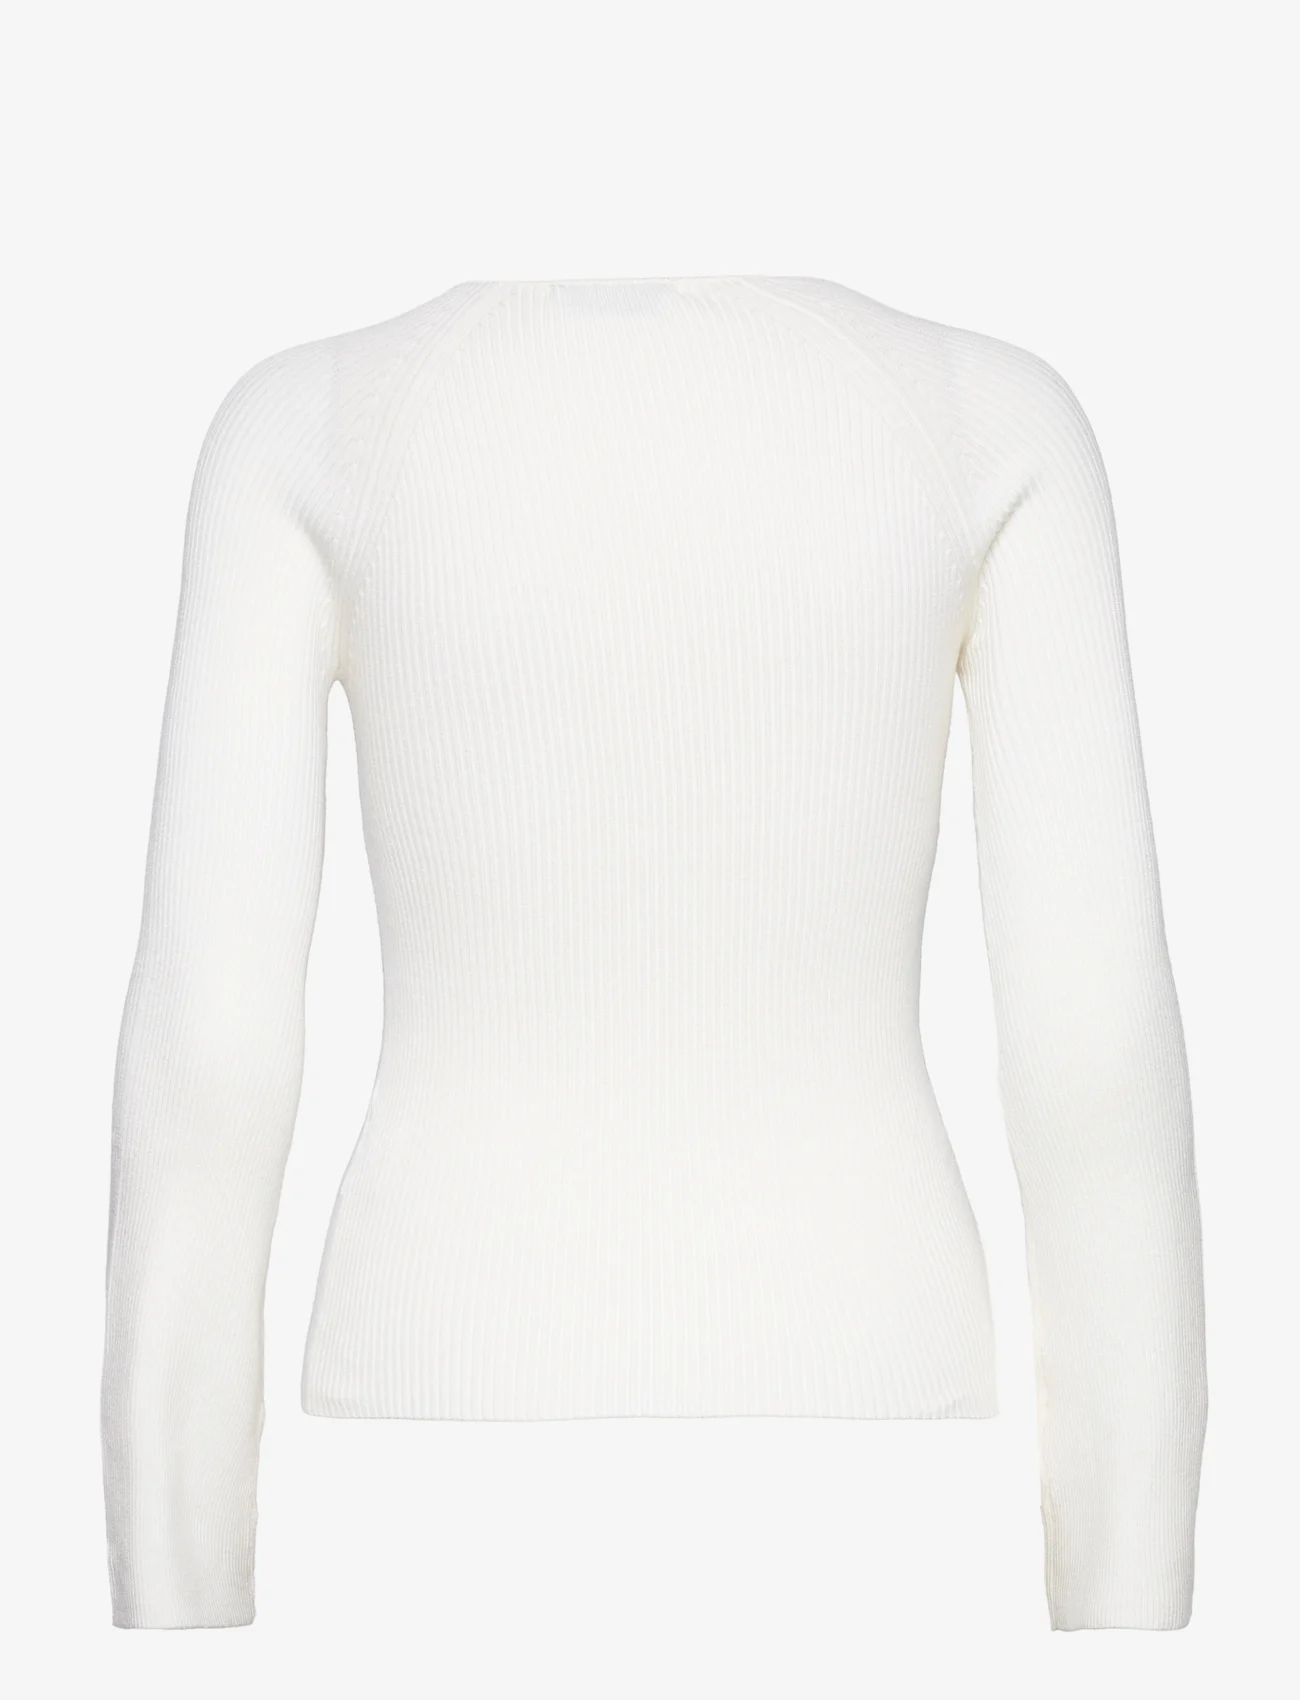 NORR - Sherry WS knit top - gensere - off-white - 1